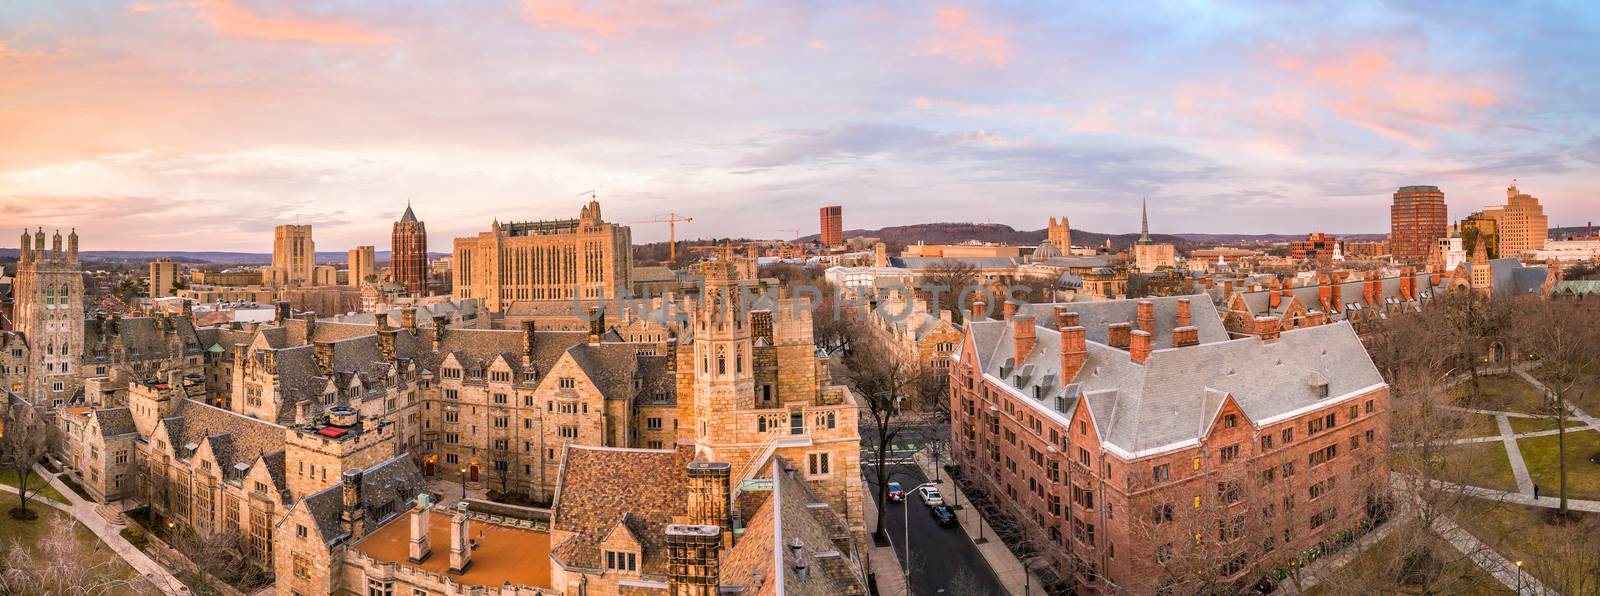 Historical building and Yale university campus from top view by f11photo